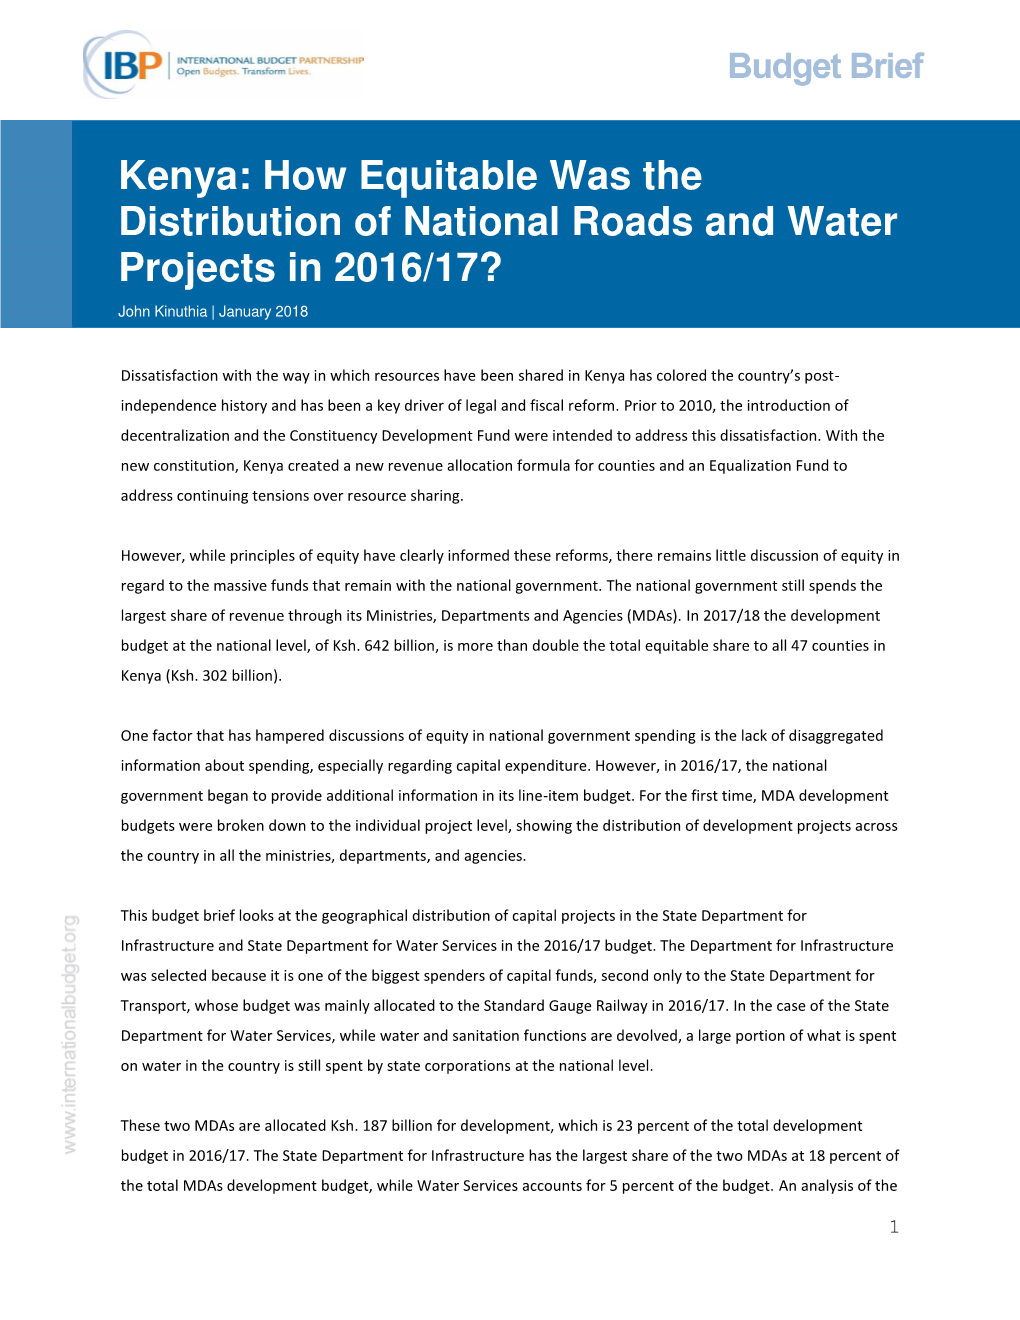 Kenya: How Equitable Was the Distribution of National Roads and Water